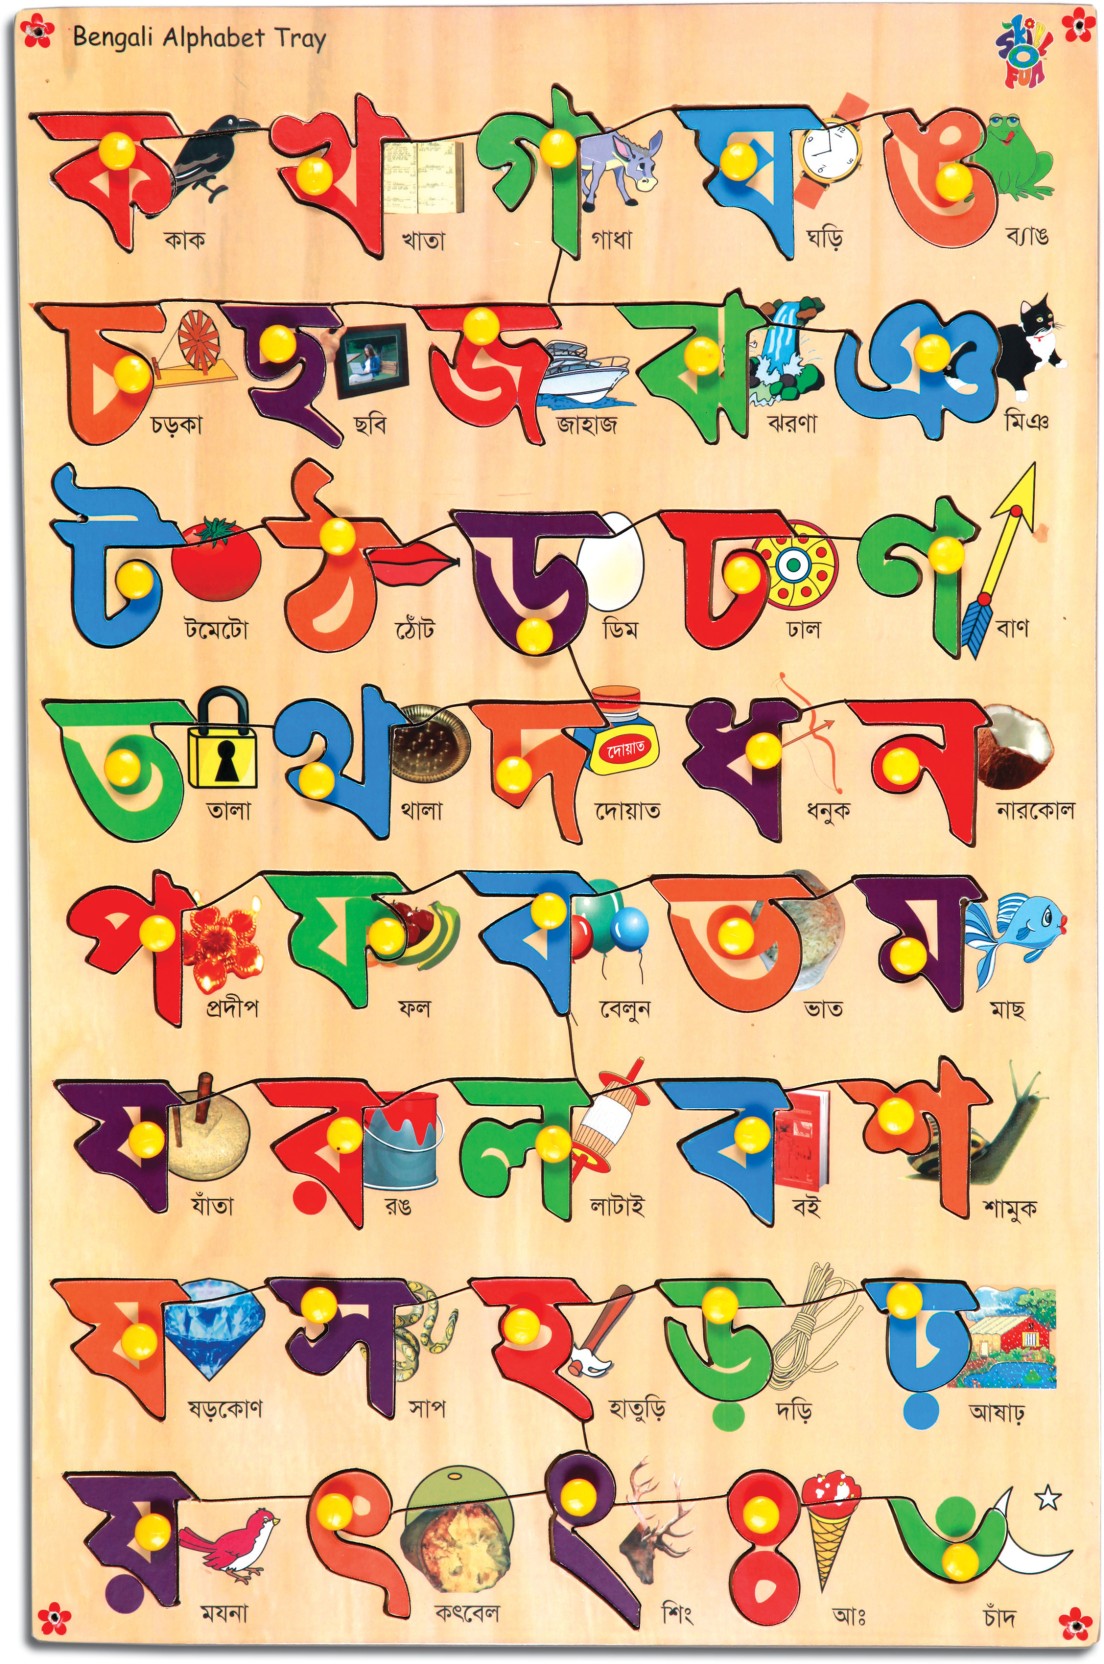 how many letters in bengali alphabet